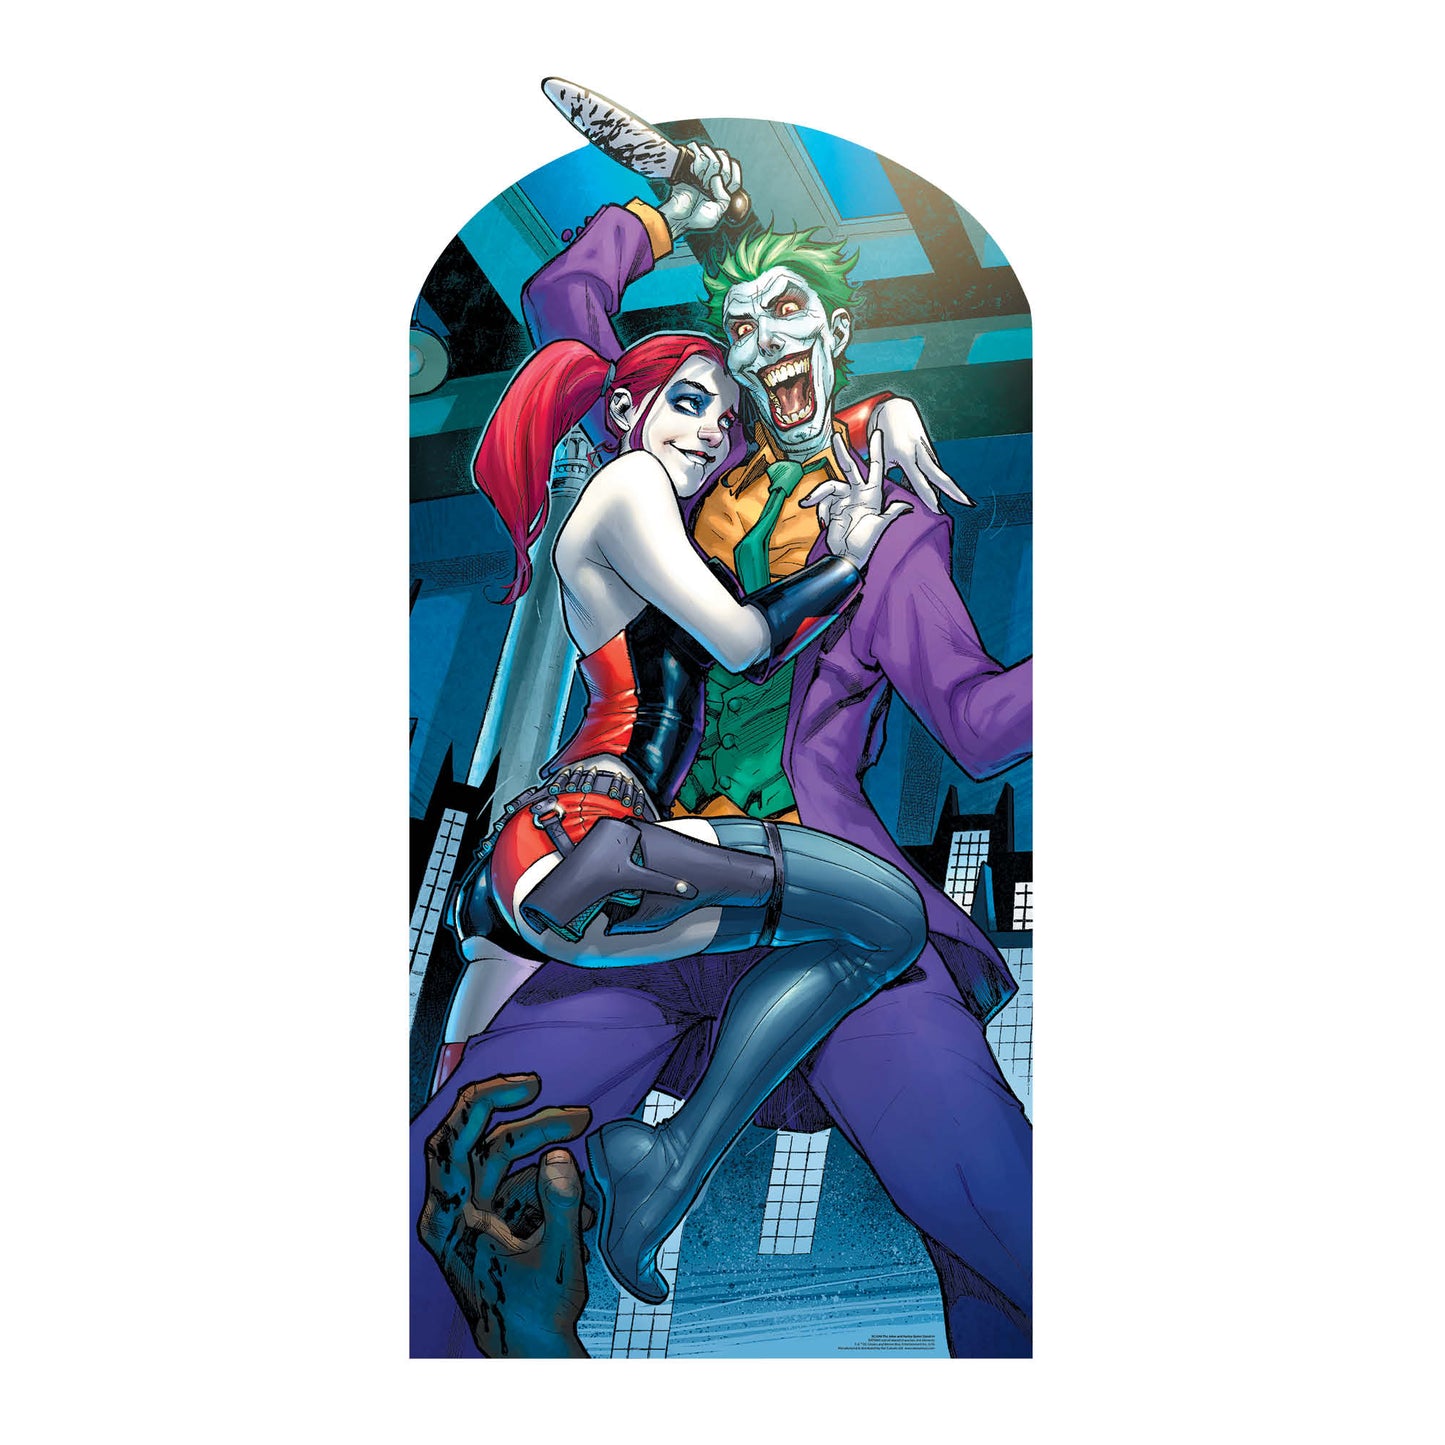 SC1346 Harley Quinn and The Joker Stand-In with Knife Cardboard Cut Out Height 192cm